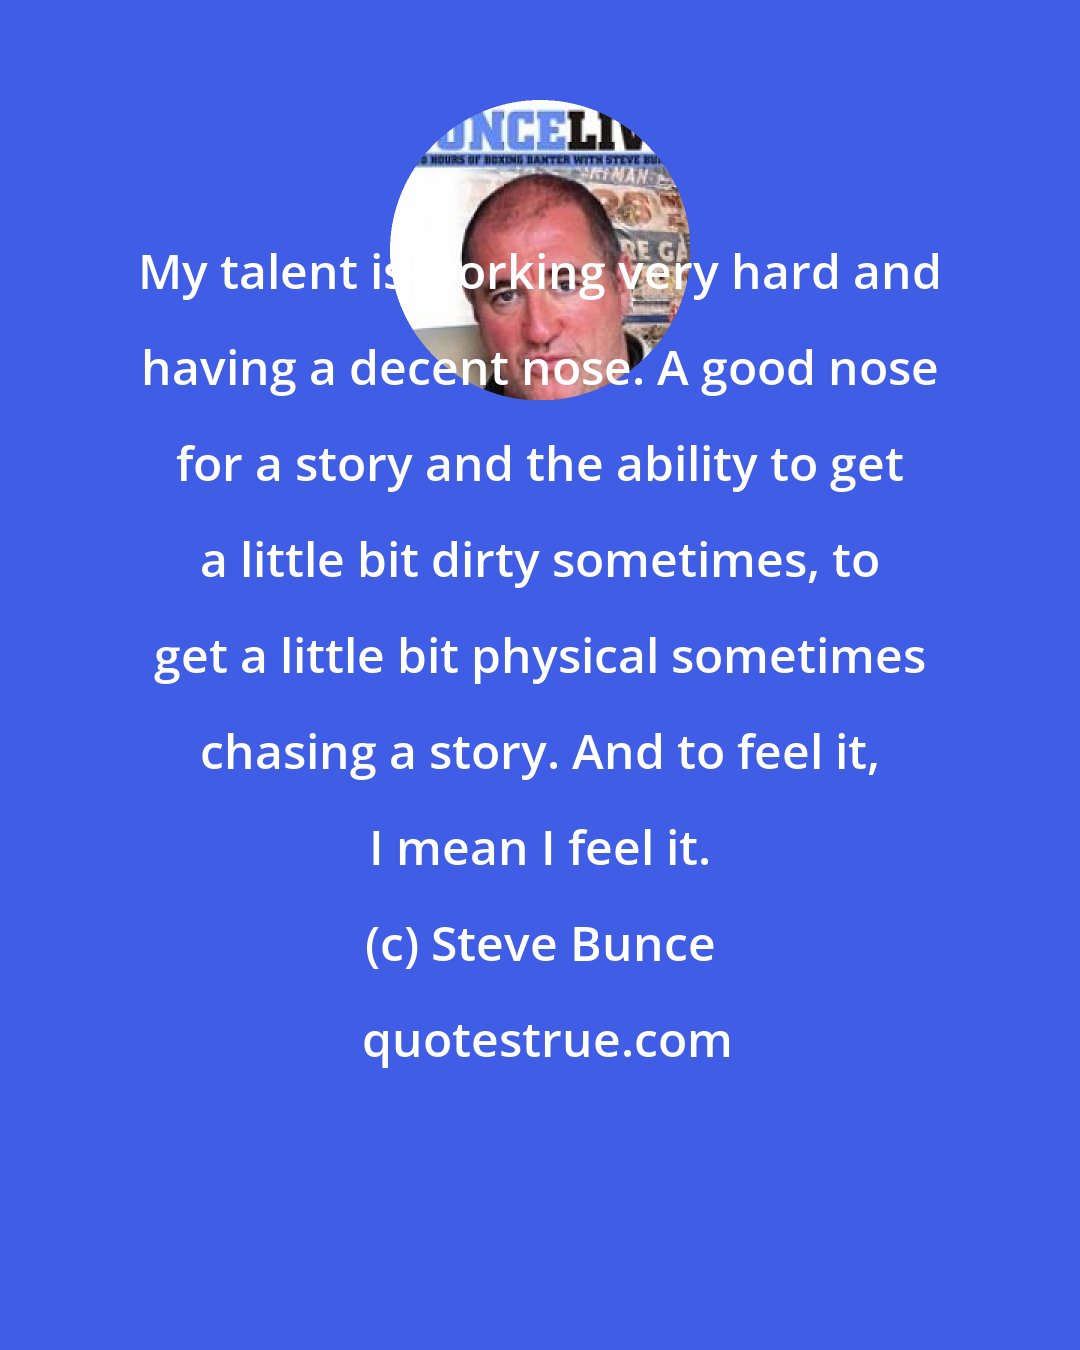 Steve Bunce: My talent is working very hard and having a decent nose. A good nose for a story and the ability to get a little bit dirty sometimes, to get a little bit physical sometimes chasing a story. And to feel it, I mean I feel it.